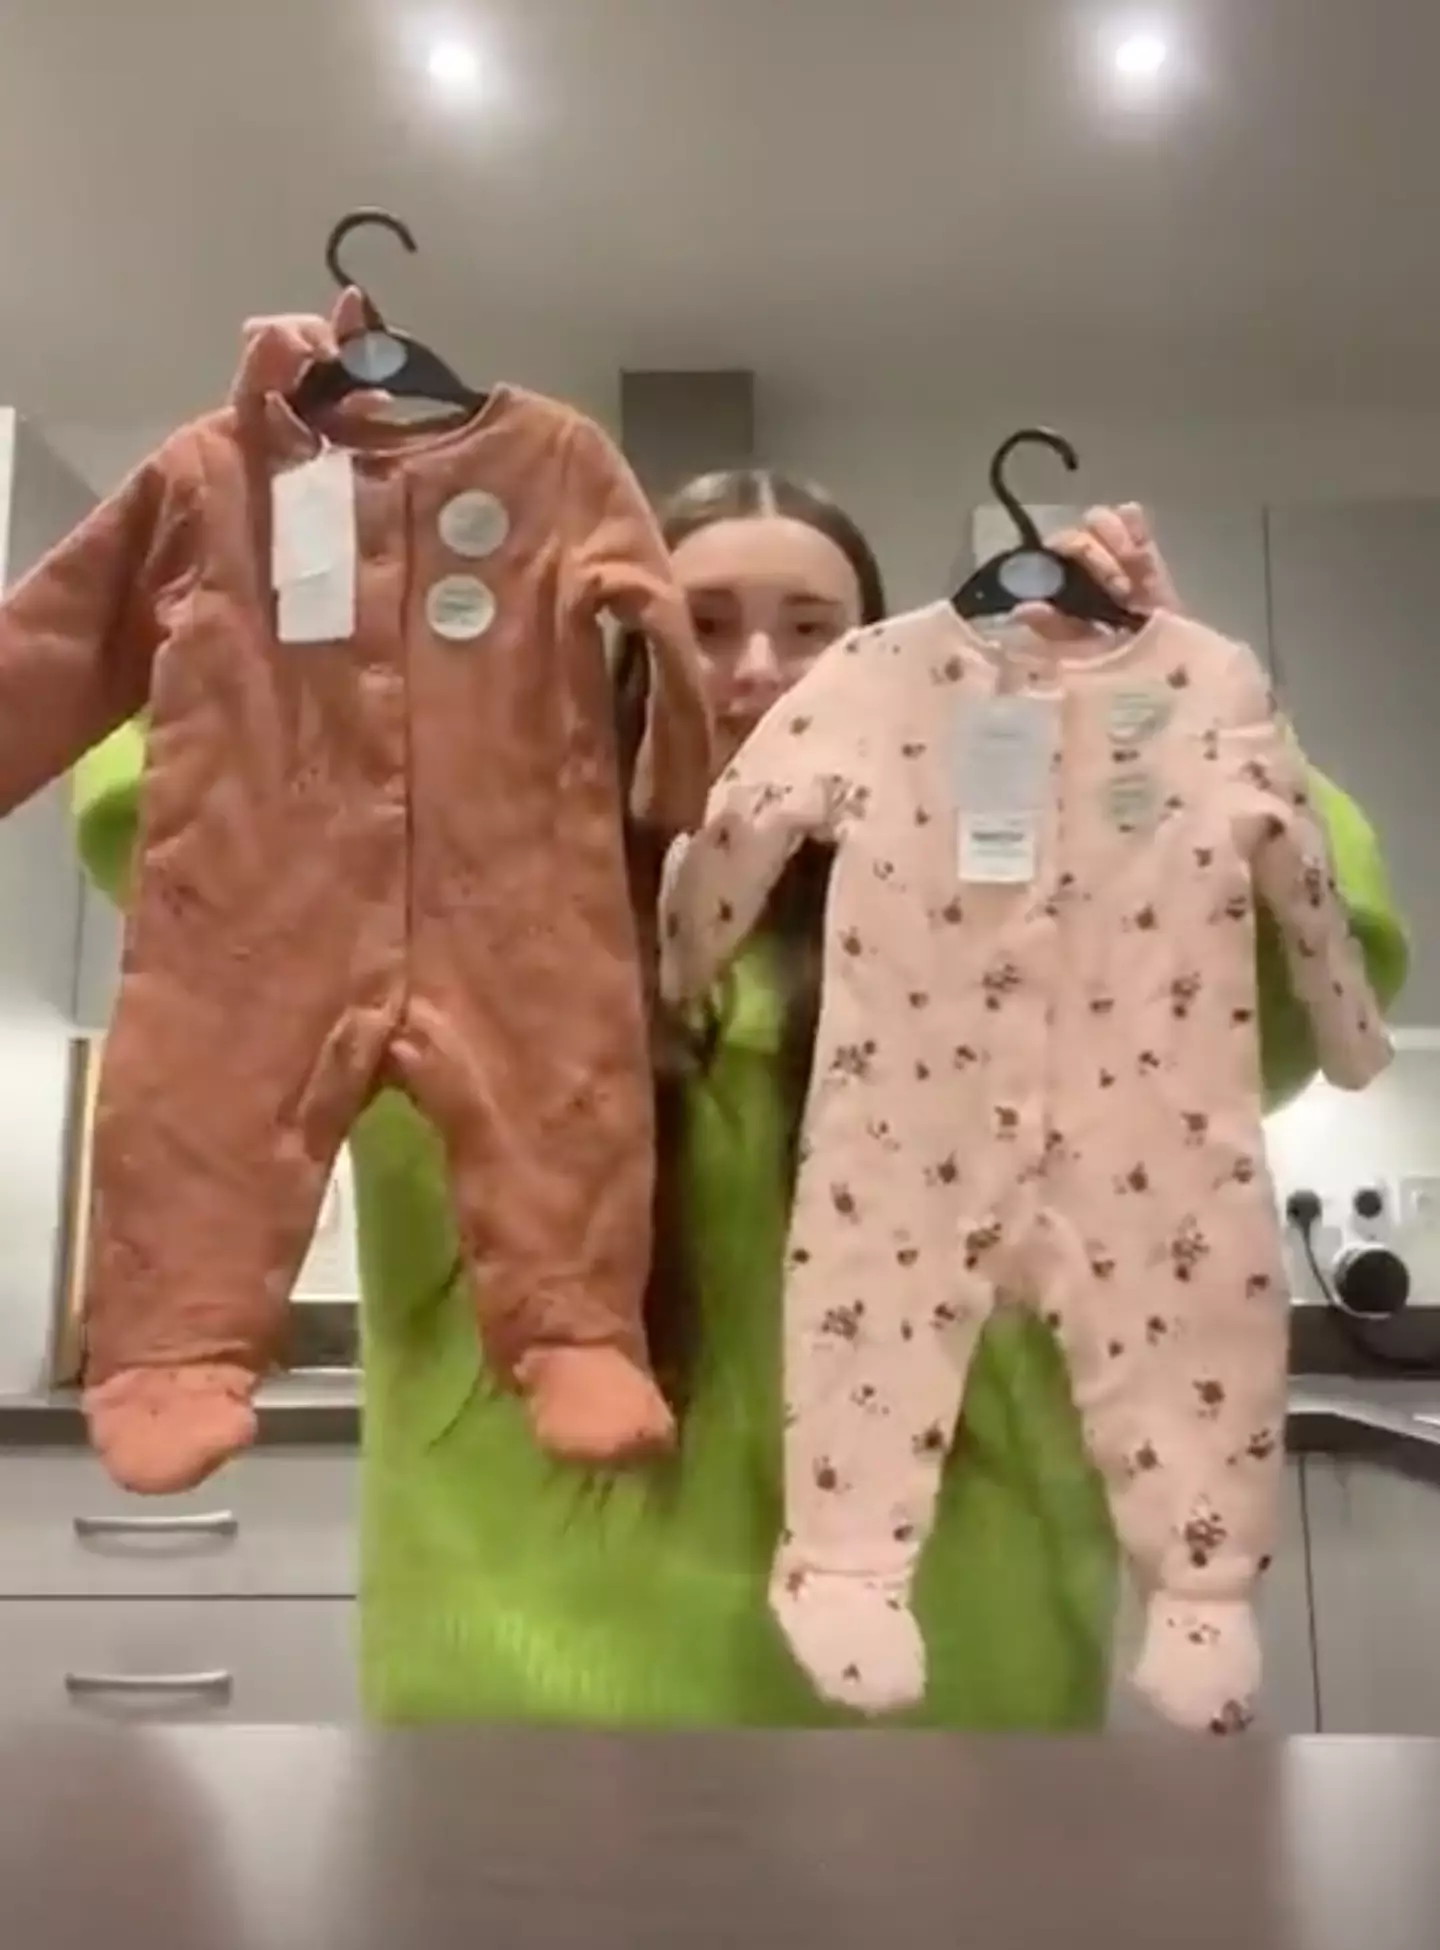 The mum revealed the baby sleepsuits she bought from Sainsbury's.